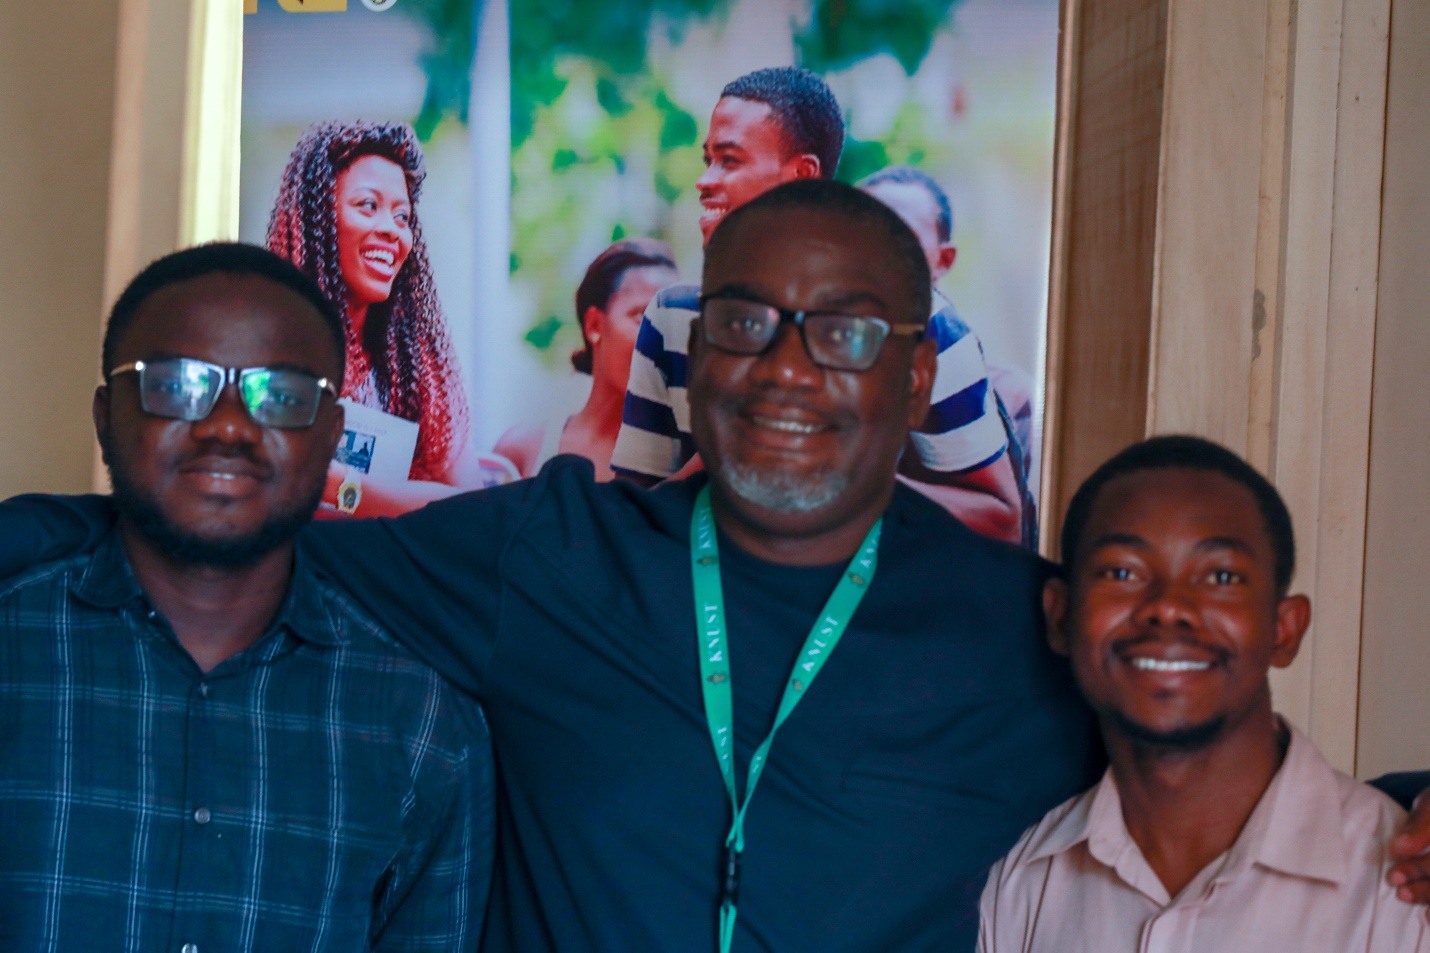 Prof. Kwabena Nyarko (in the middle) with KEEP postgraduate students